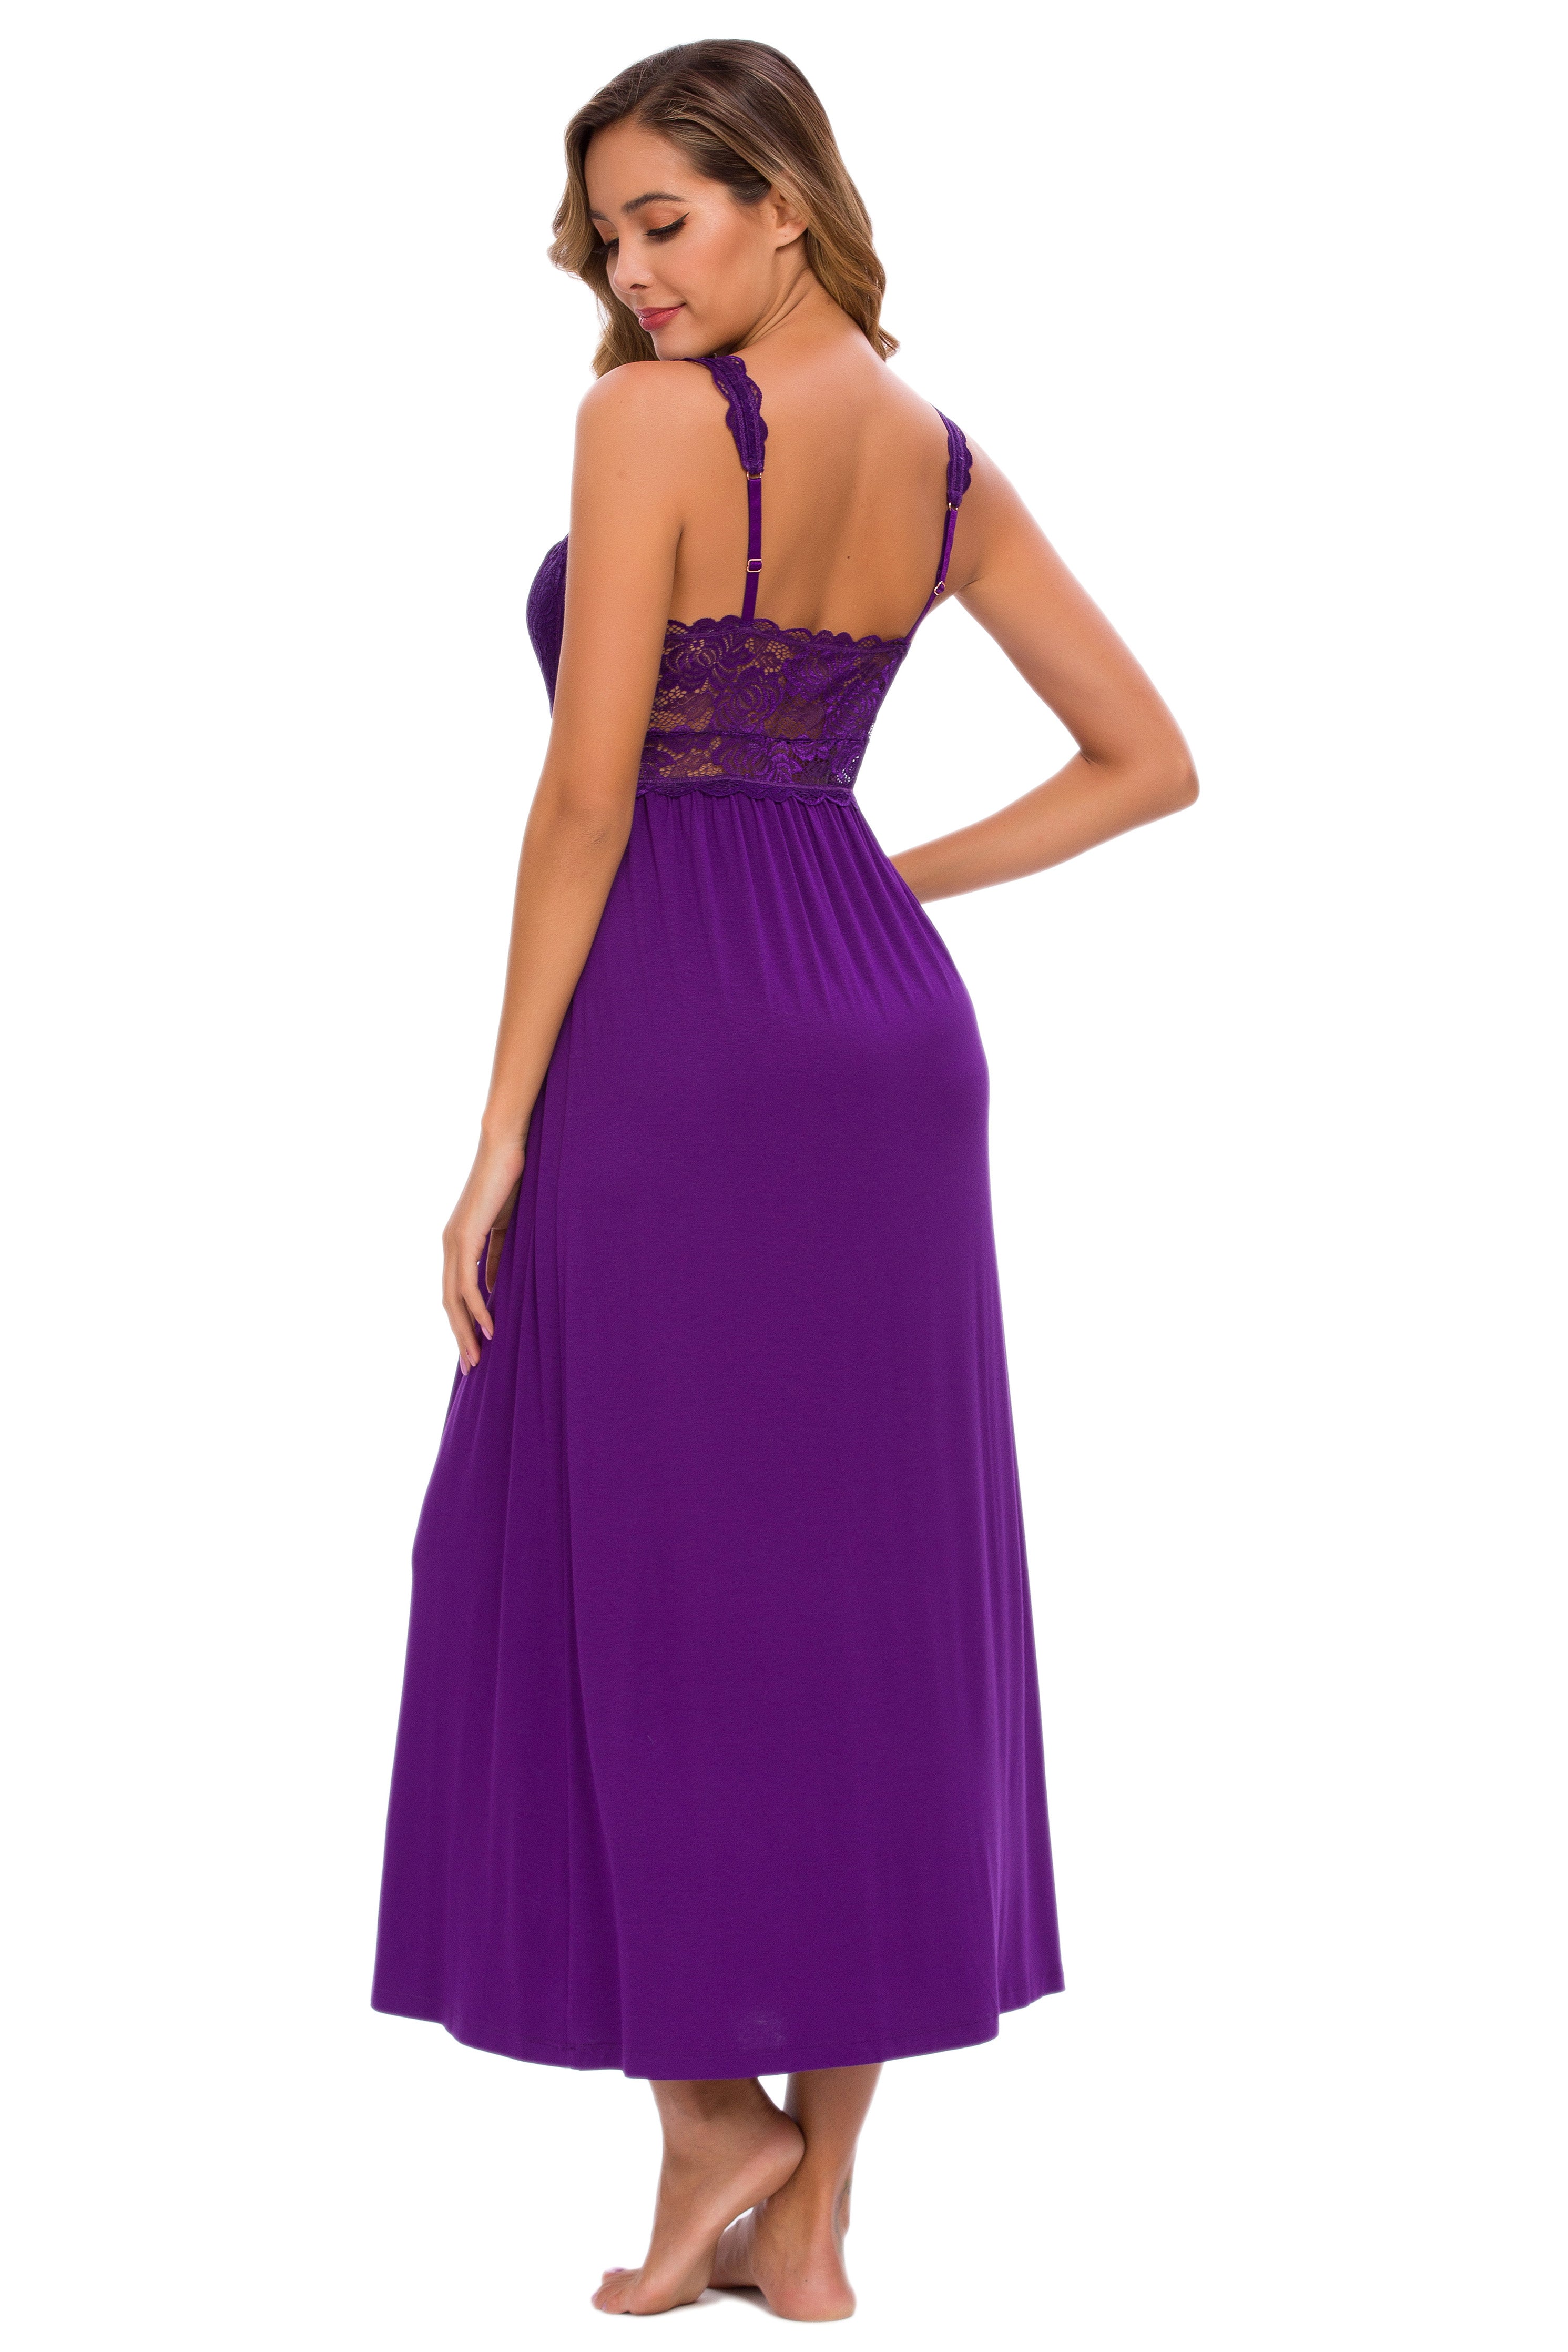 Sexy Lace Jersey Elegant Long Nightgown Chemises Purple